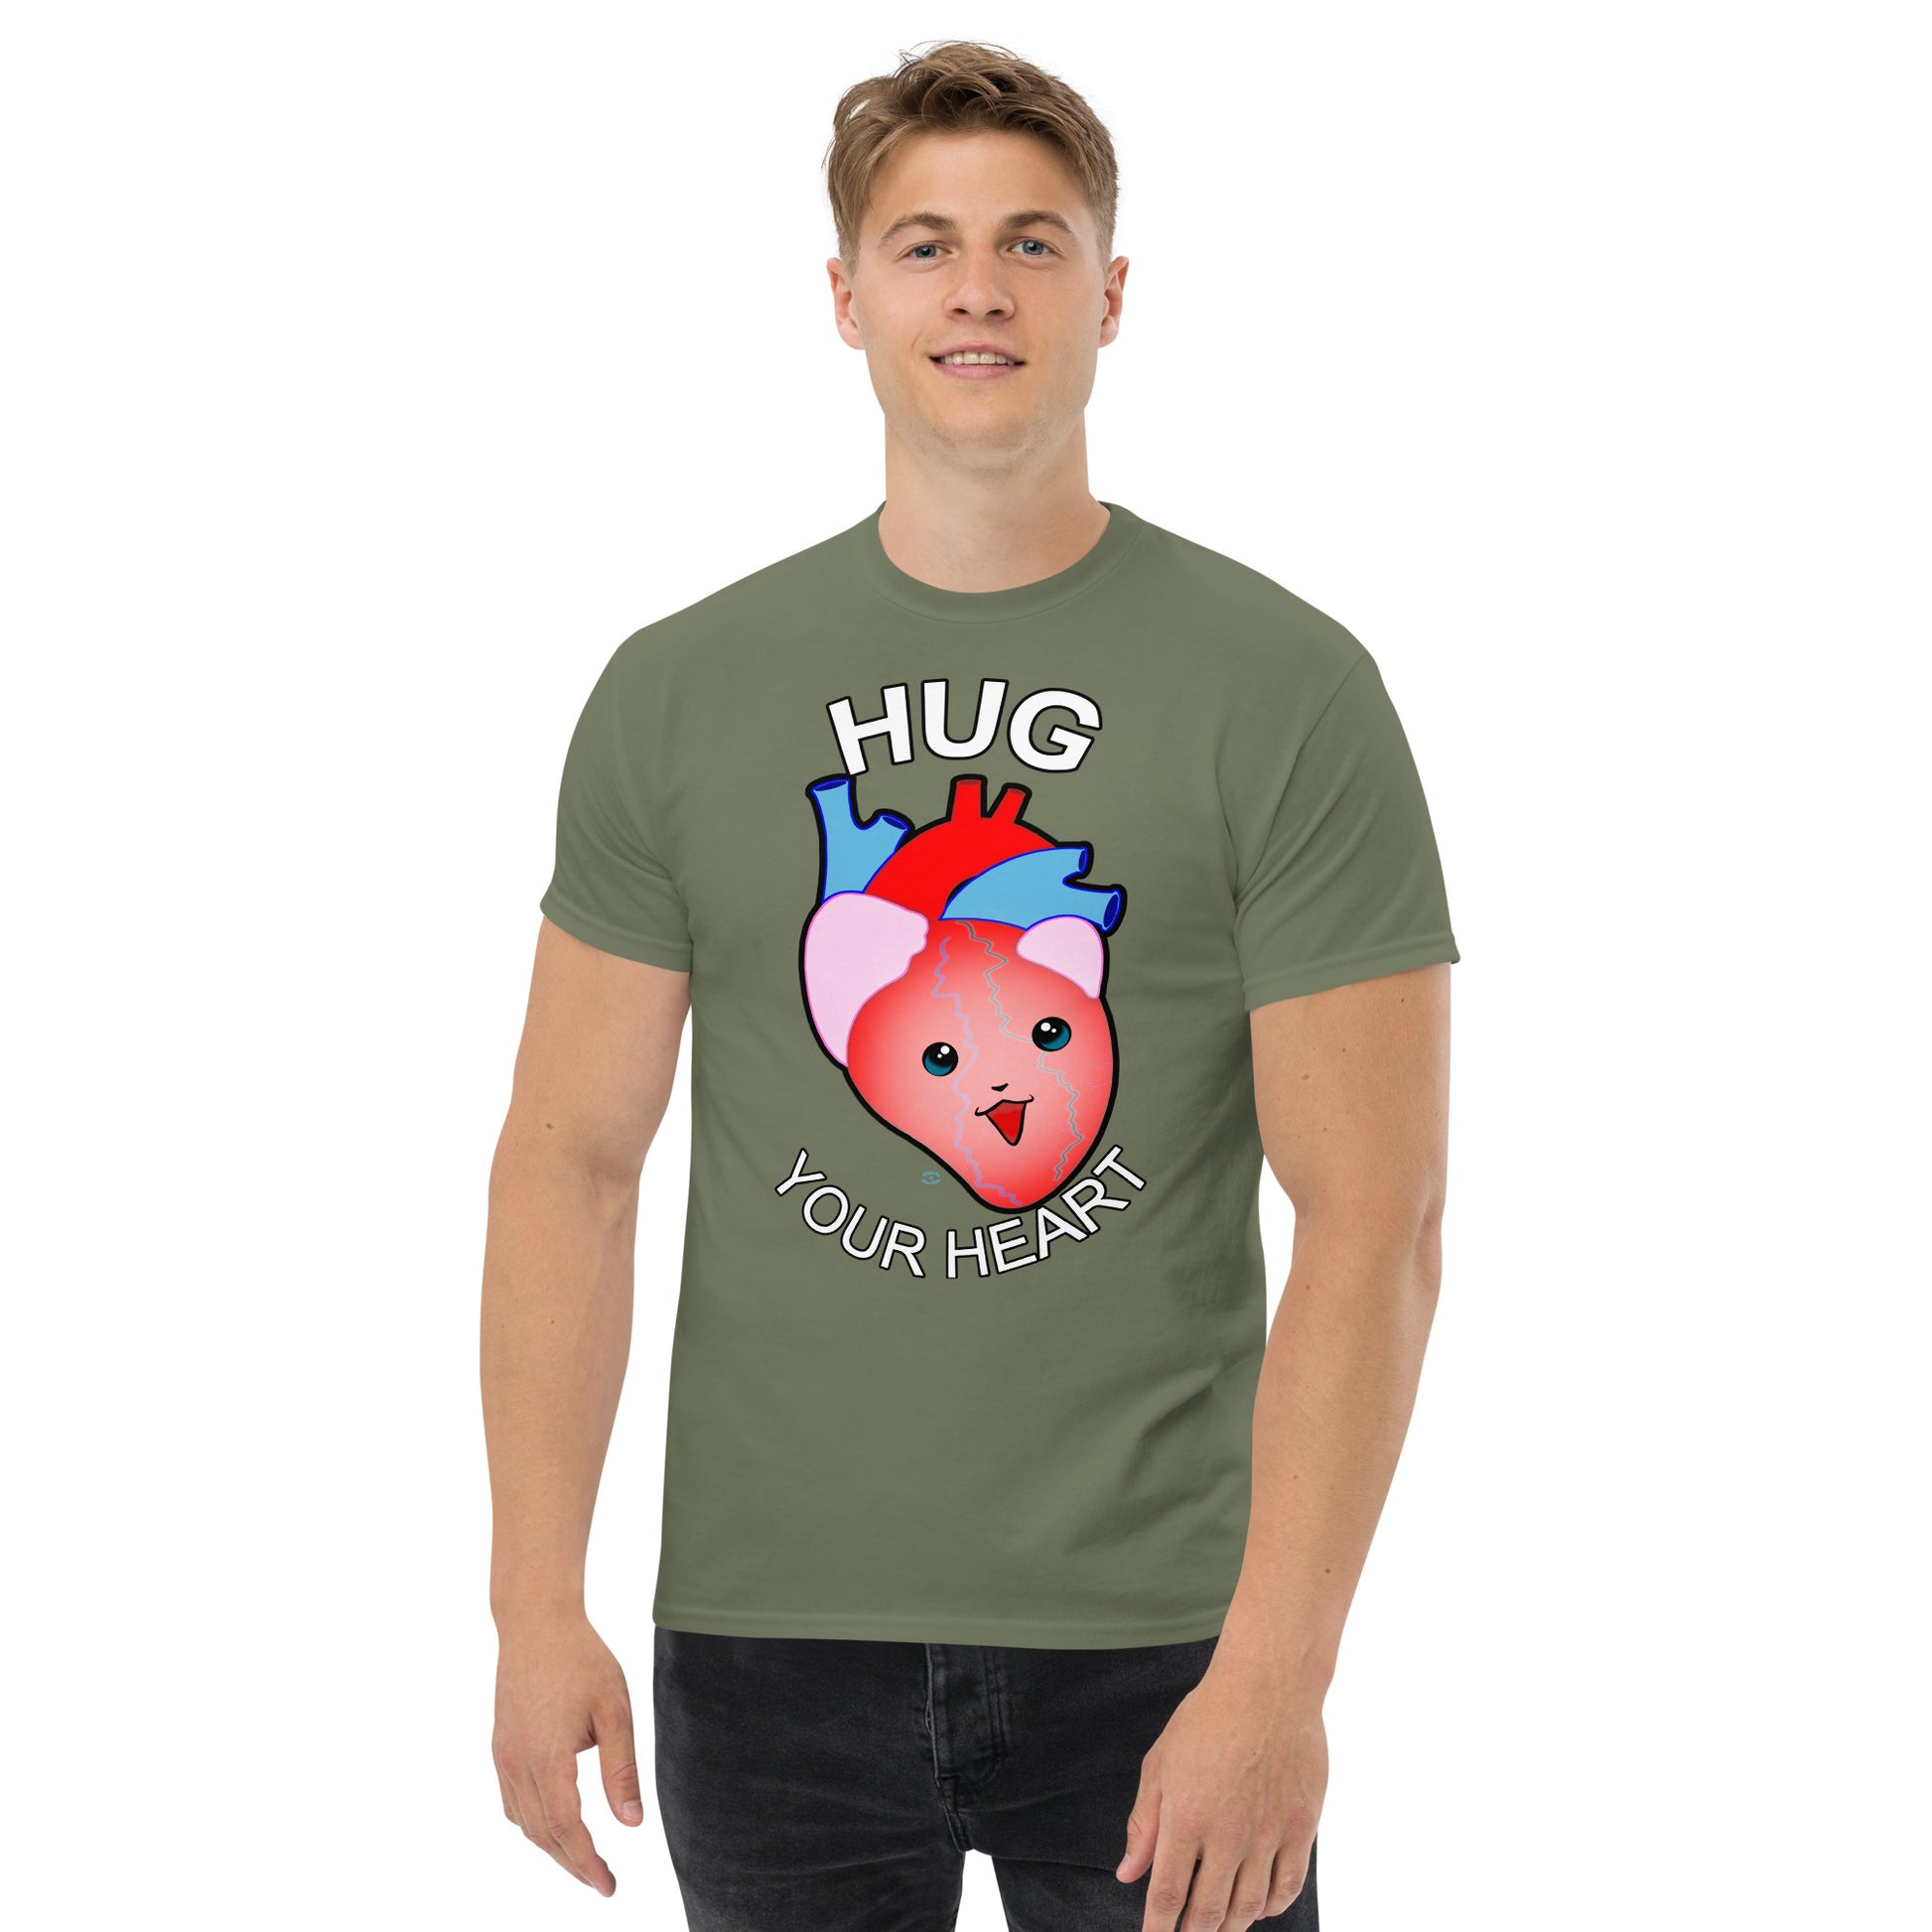 A Picture of a man wearing a short sleeved tshirt with a picture on the front of a smiling heart with the text "HUG Your Heart" - color military green